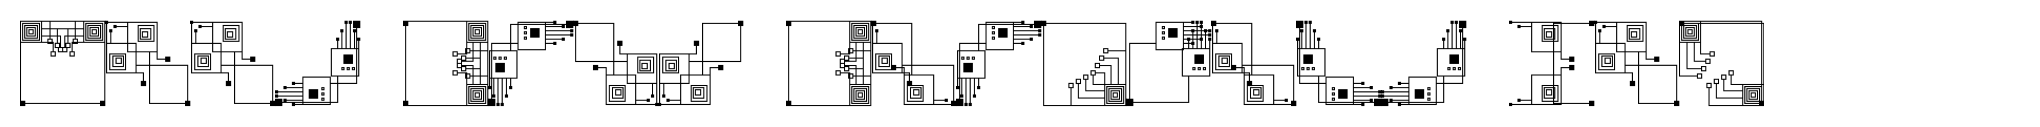 Anns Crop Circuits One image